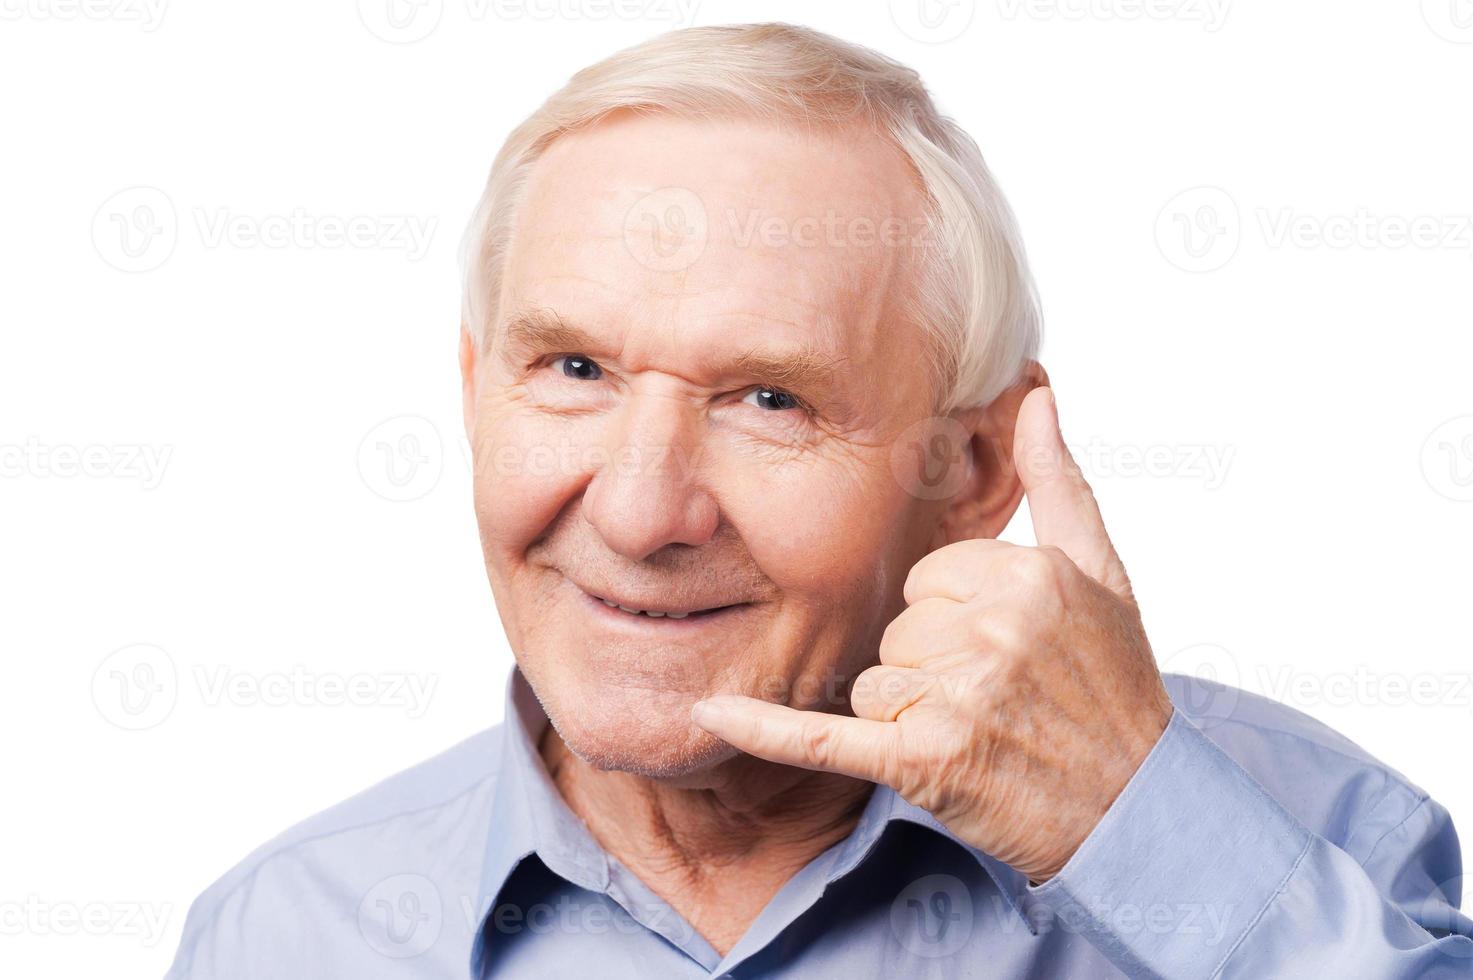 Waiting for your call. Cheerful senior man in shirt gesturing mobile phone near his face and smiling while standing against white background photo